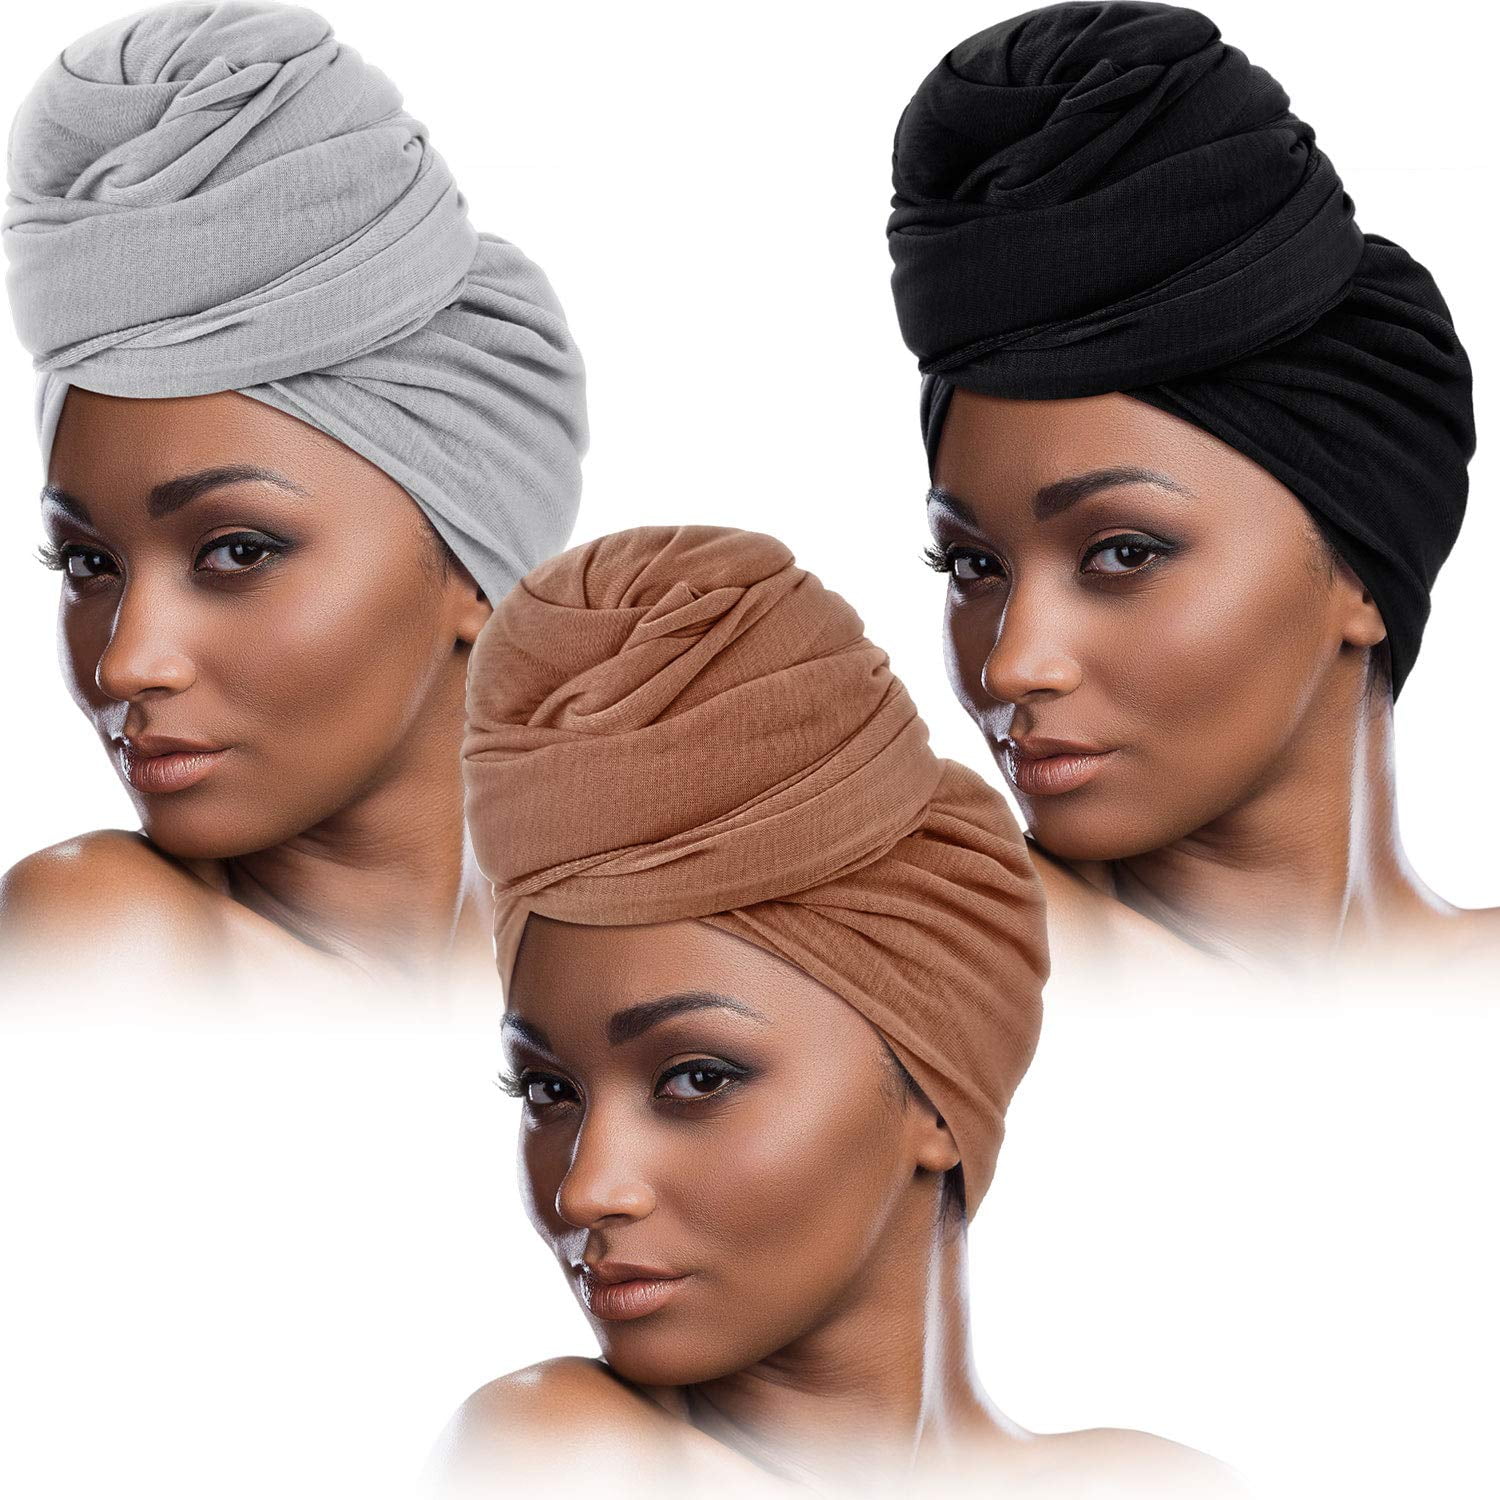 2 Pieces Stretch Head Wrap Scarf Stretchy Turban Long Hair Scarf Wrap Solid Color Soft Head Band Tie for Women 